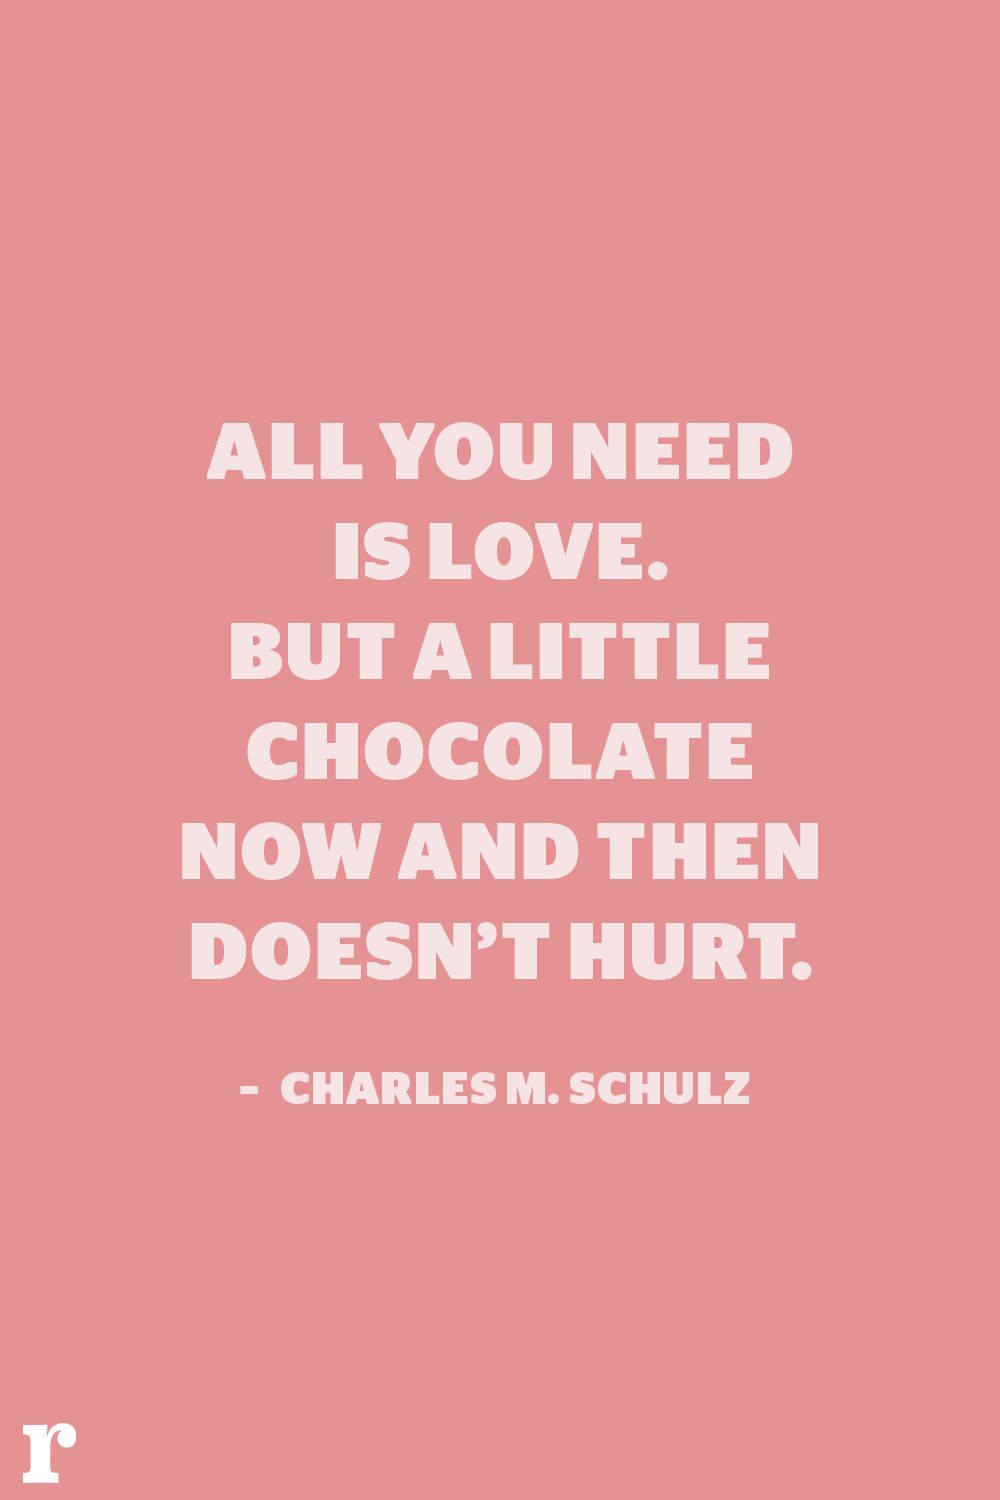 15 Funny Valentine's Day Quotes – Hilarious Love Quotes for Women